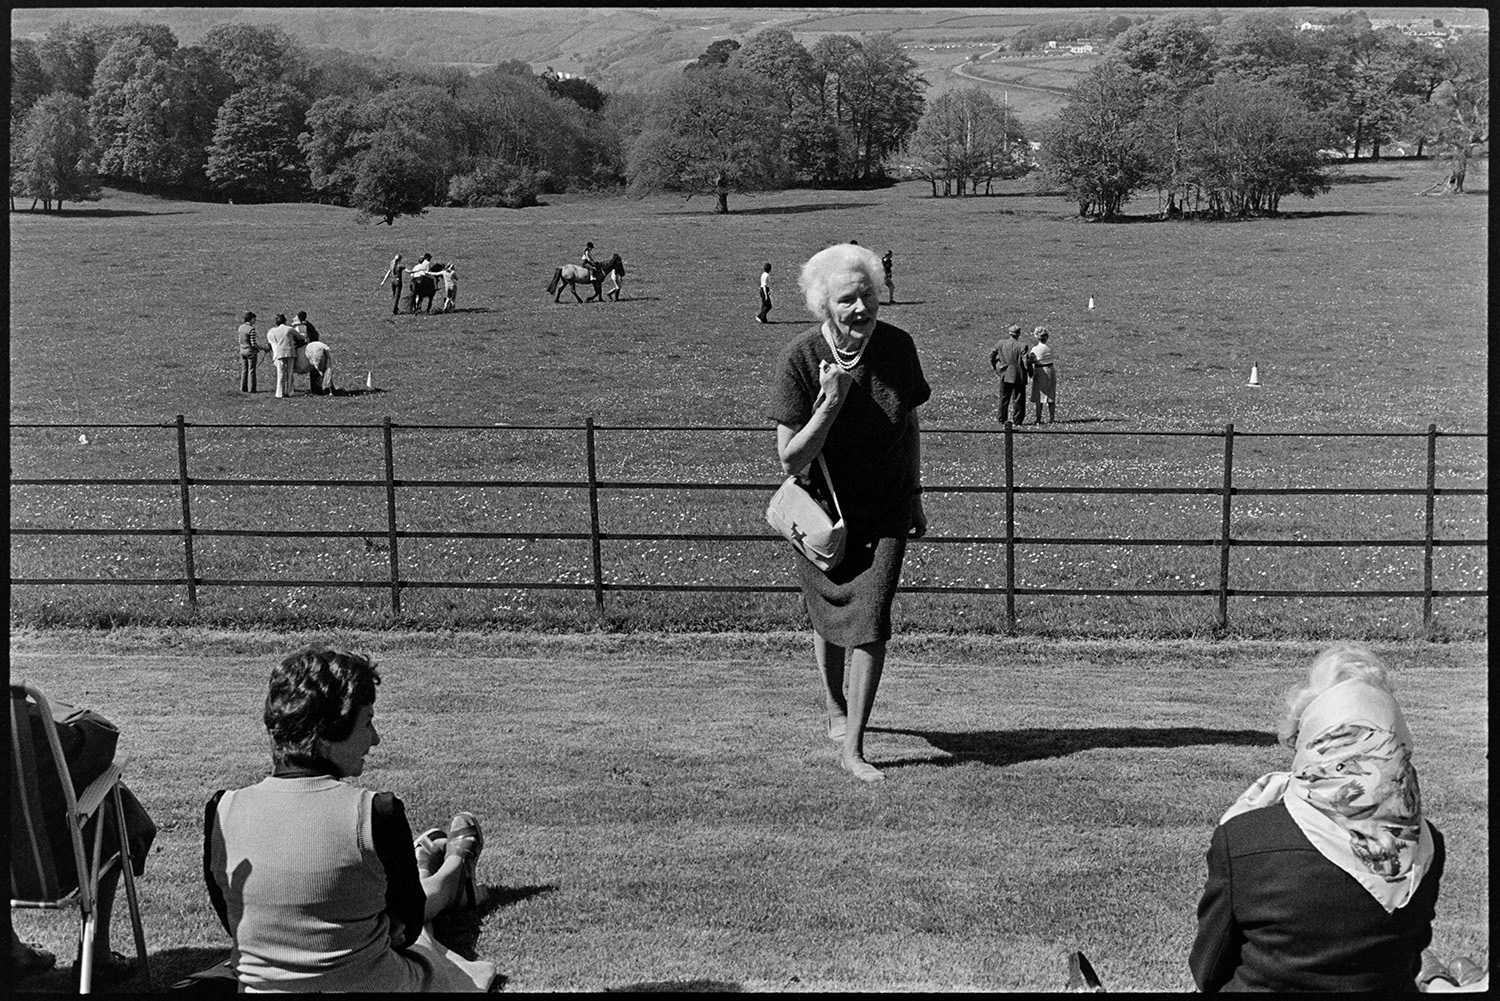 Horse riders and Wombles, Gymkhana, people chatting and having fun in aid of the handicapped. 
[Women sat on a grassy slope outside Cross House, Torrington watching children having pony rides at a fete to raise money for the Riding for the Disabled Association. Lady Fisher is walking towards the women sitting down. One woman is wearing a headscarf. Parkland can be seen in the background.]